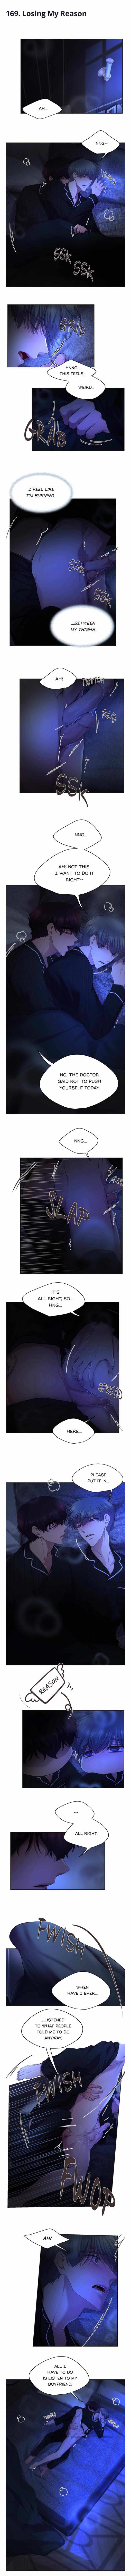 Hold Me Tight - Page 1